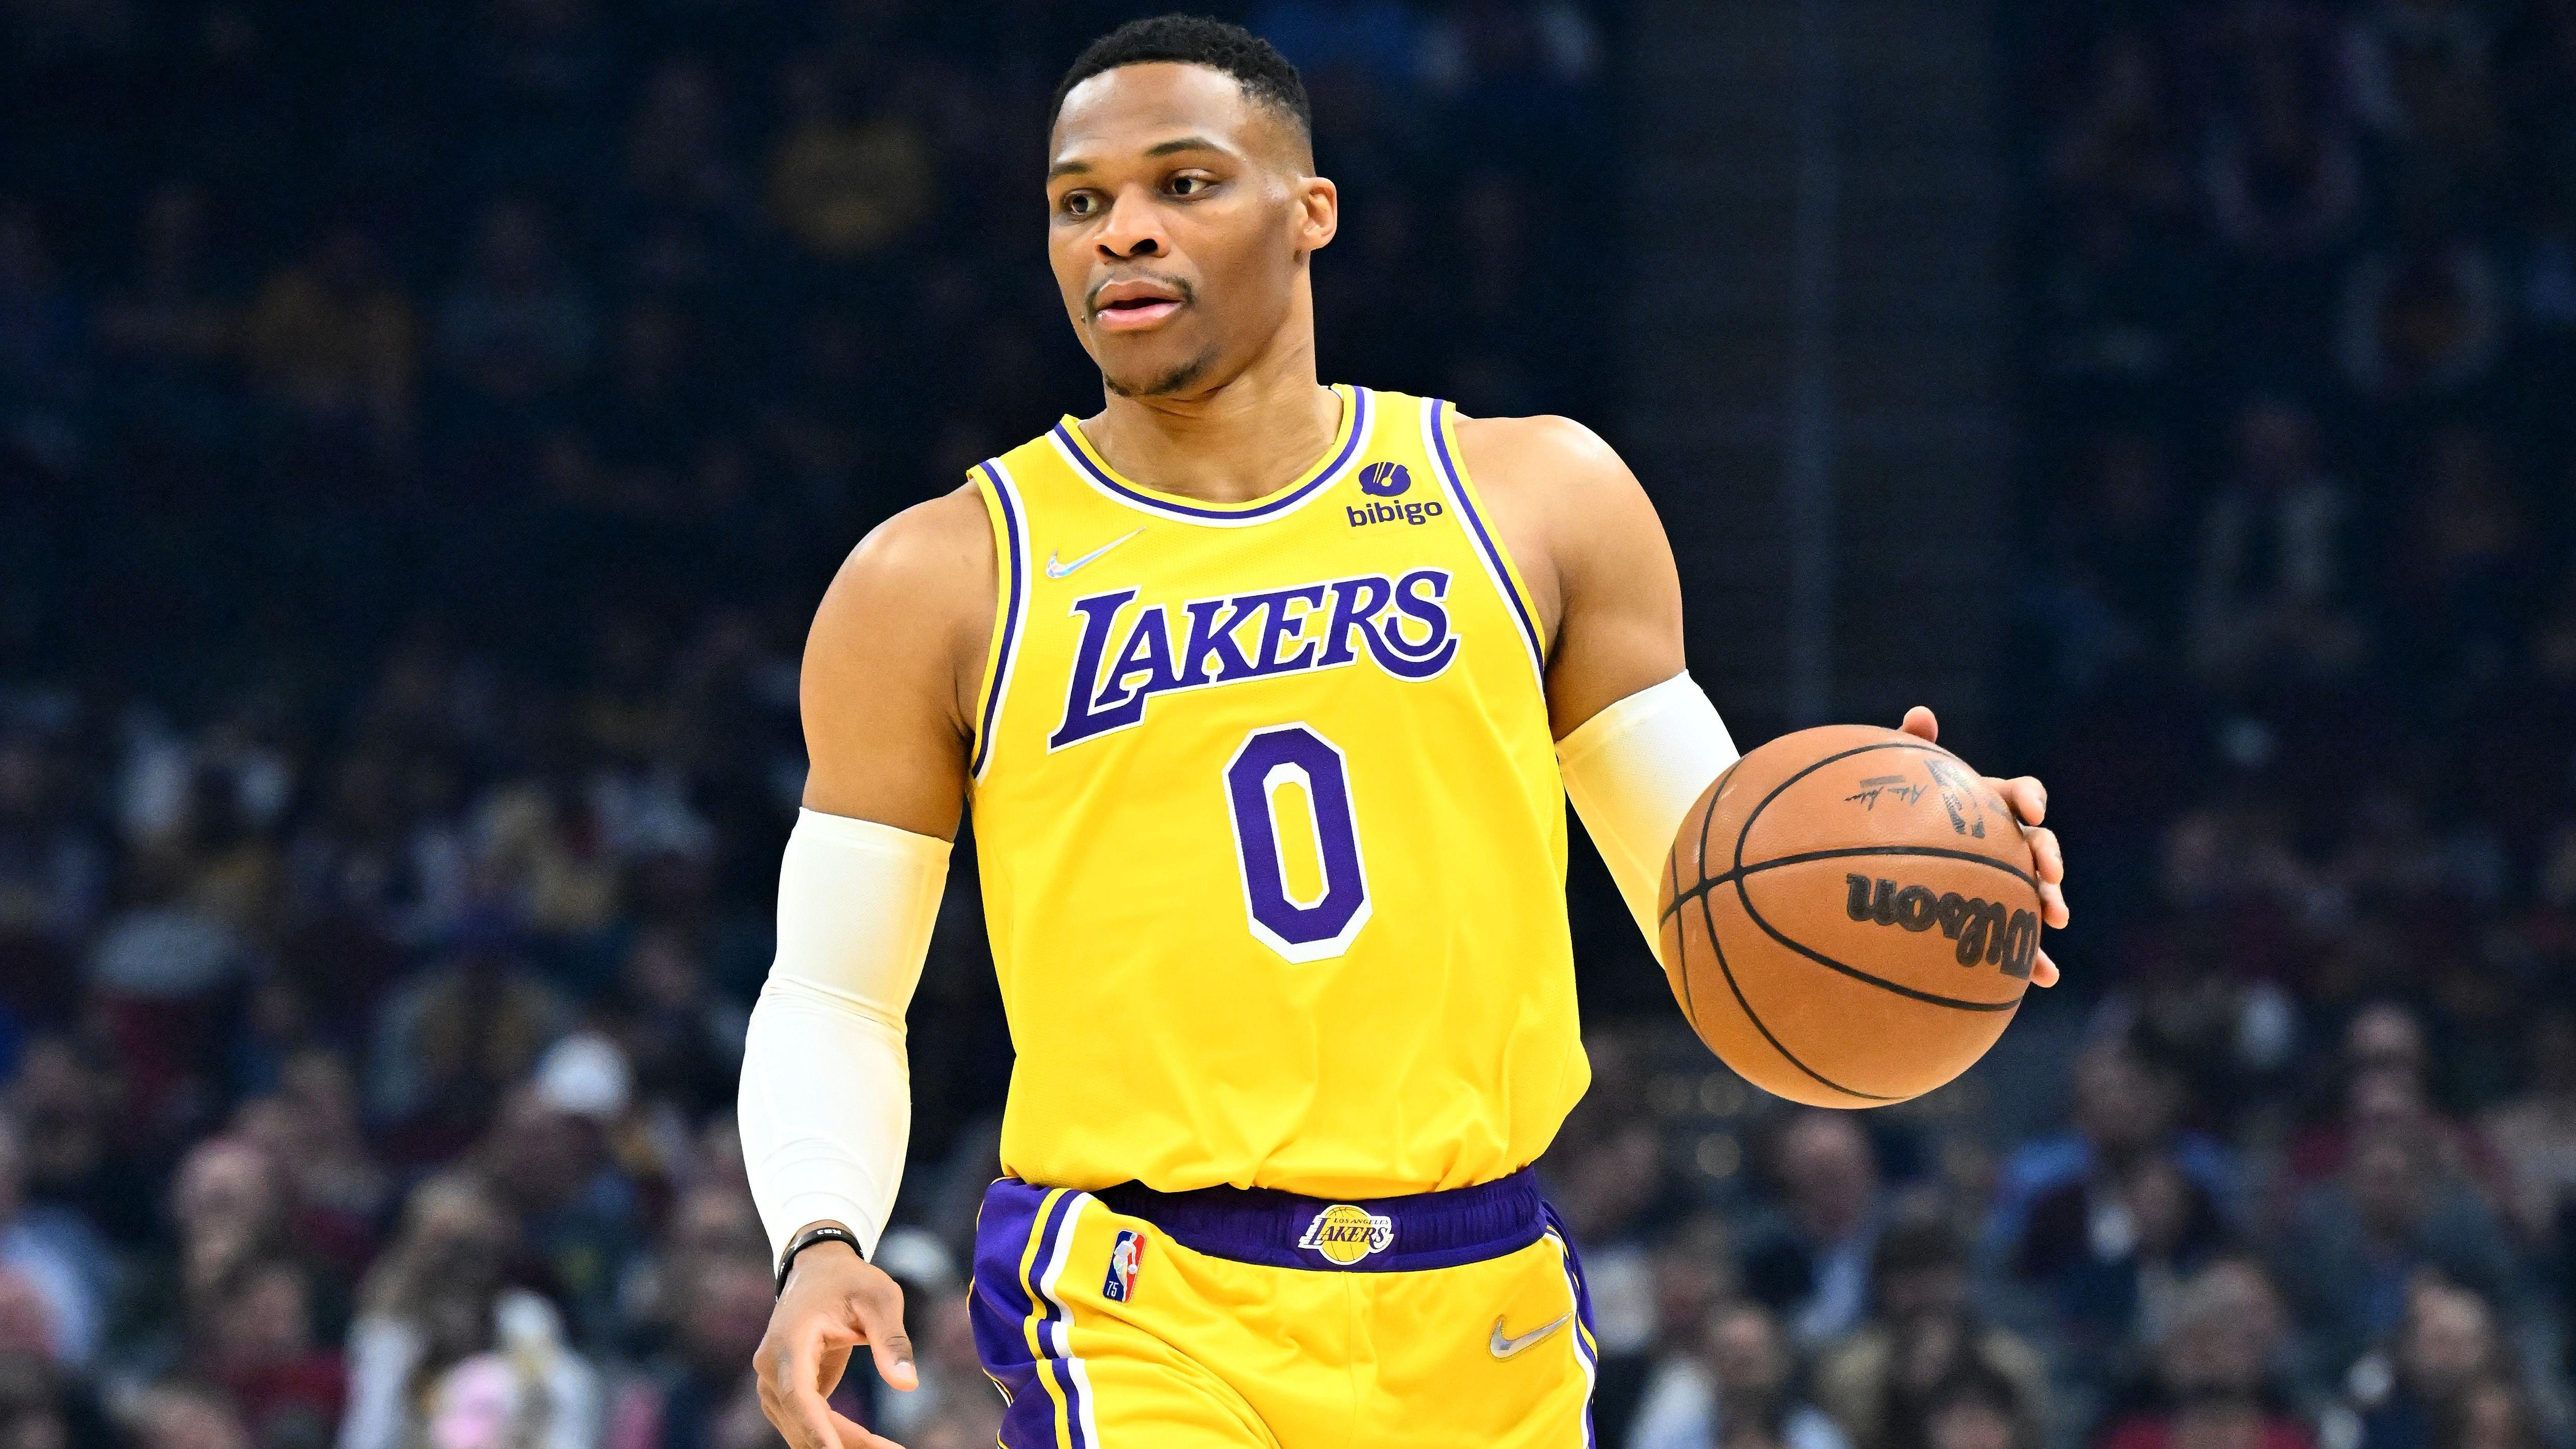 Russell Westbrook making plays for the Lakers